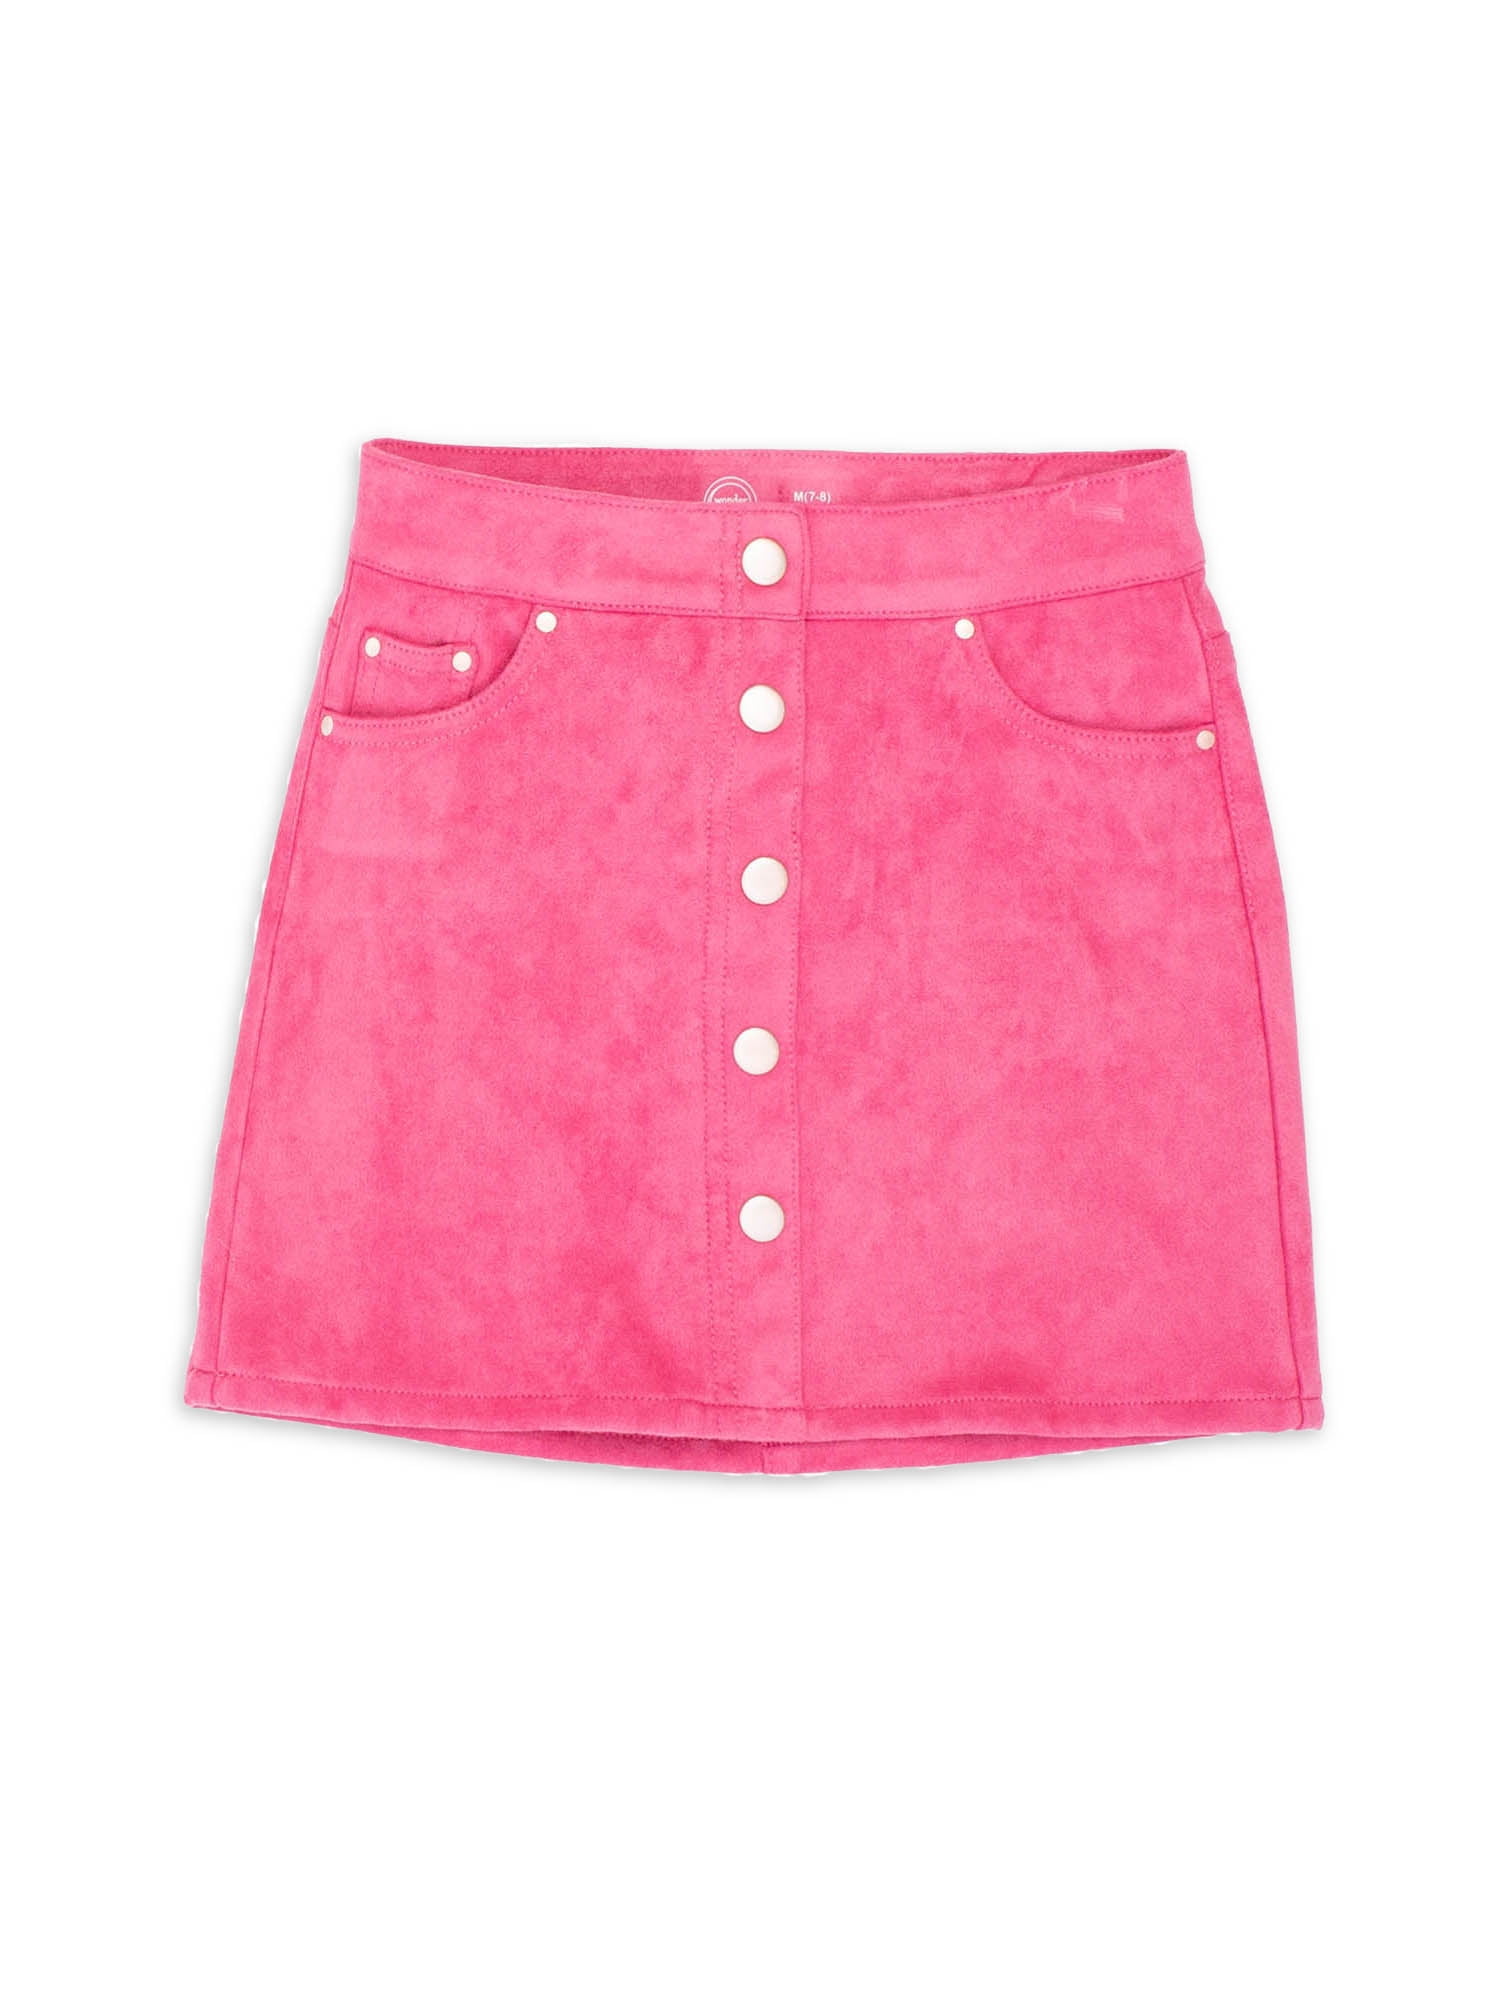 Wonder Nation Girls Mid-Rise Faux Suede Skirt, Sizes 4-18 & Plus ...